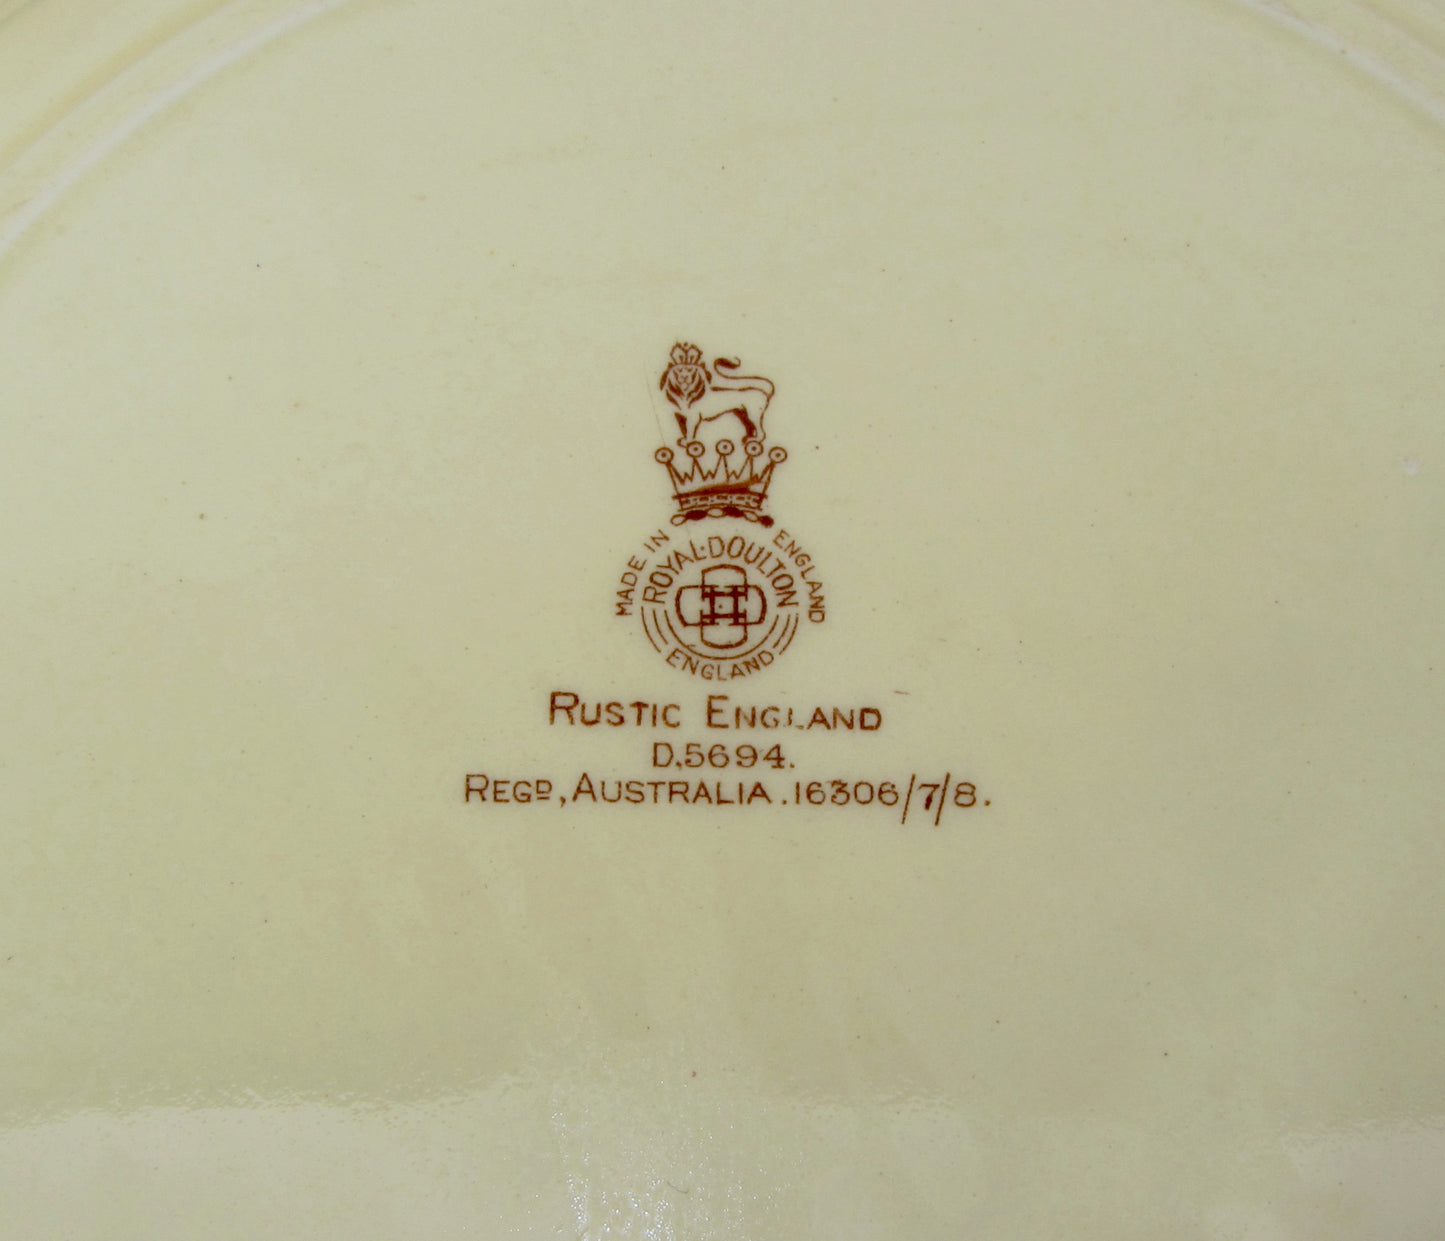 1936 Royal Doulton Rustic England Dinner Plate D5694 Featuring a Chair Bodger